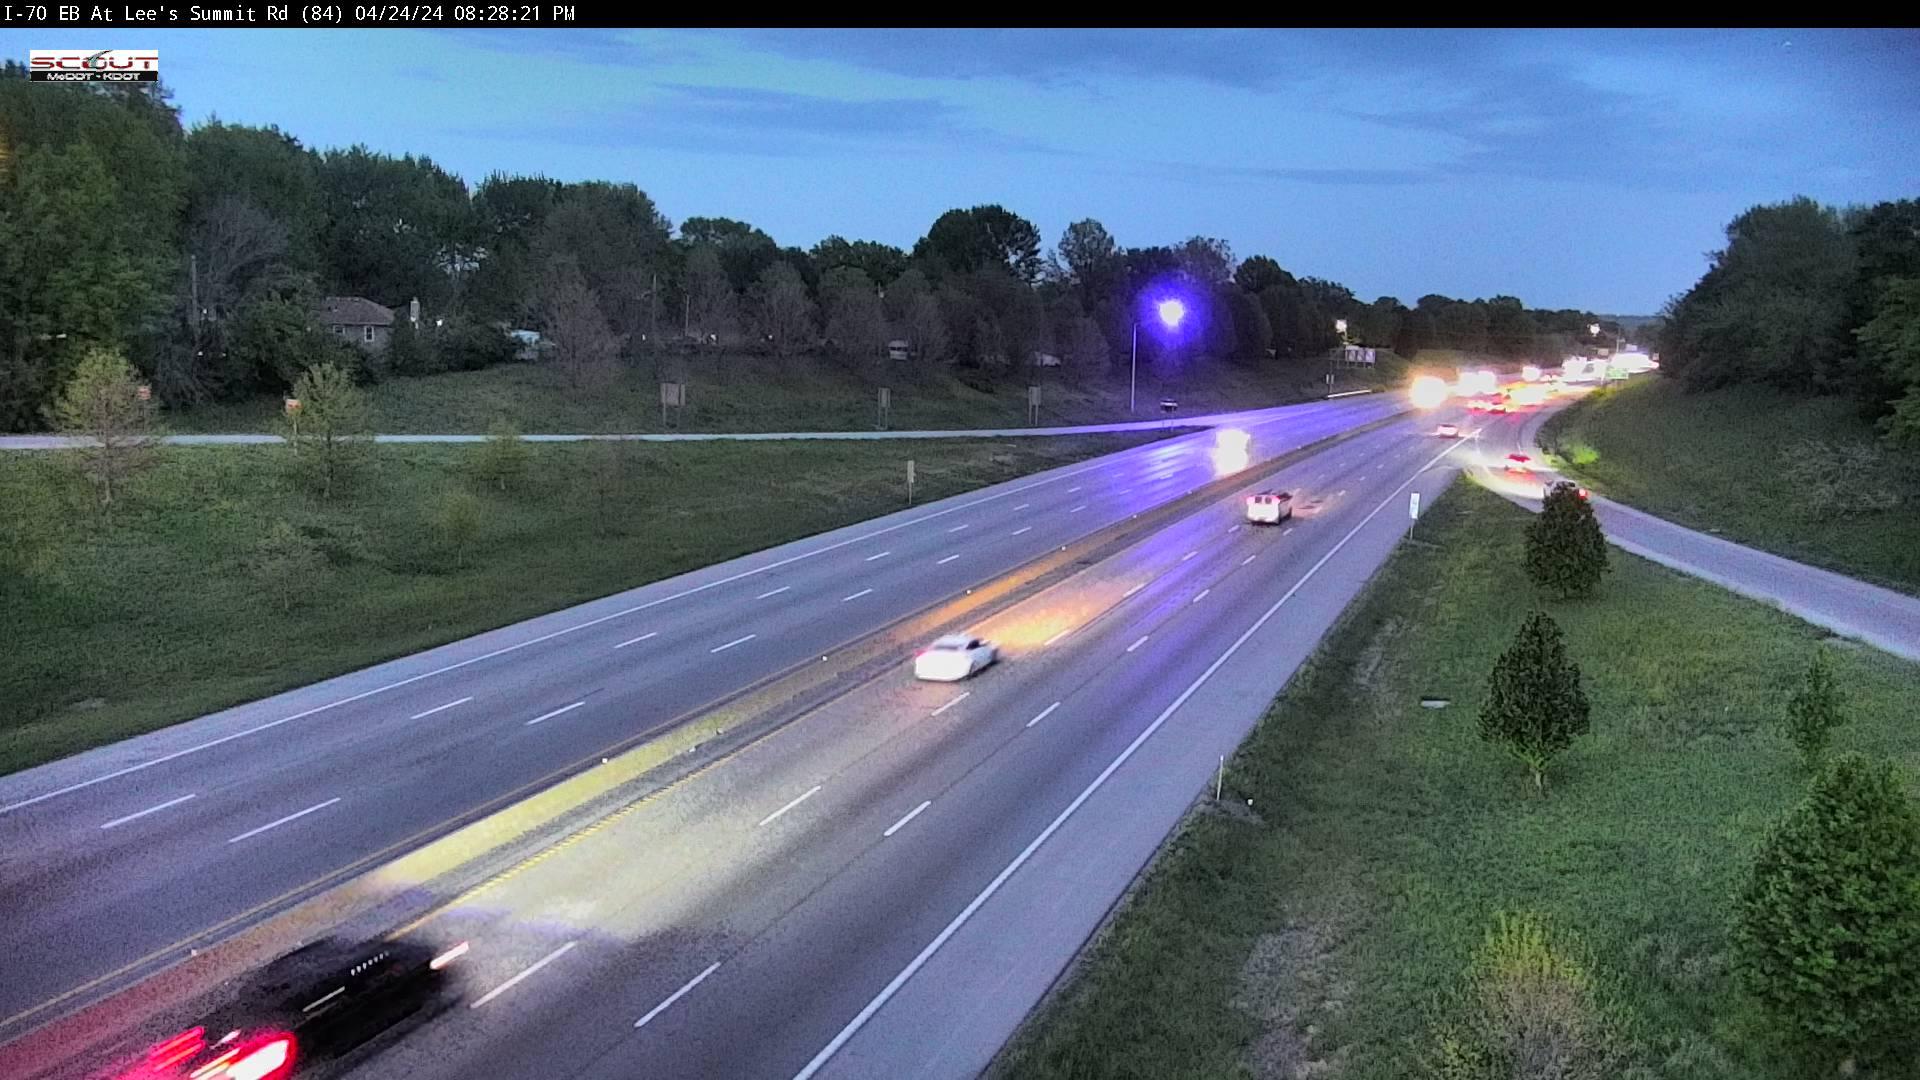 Traffic Cam Independence: I- E @ LEES SUMMIT RD Player